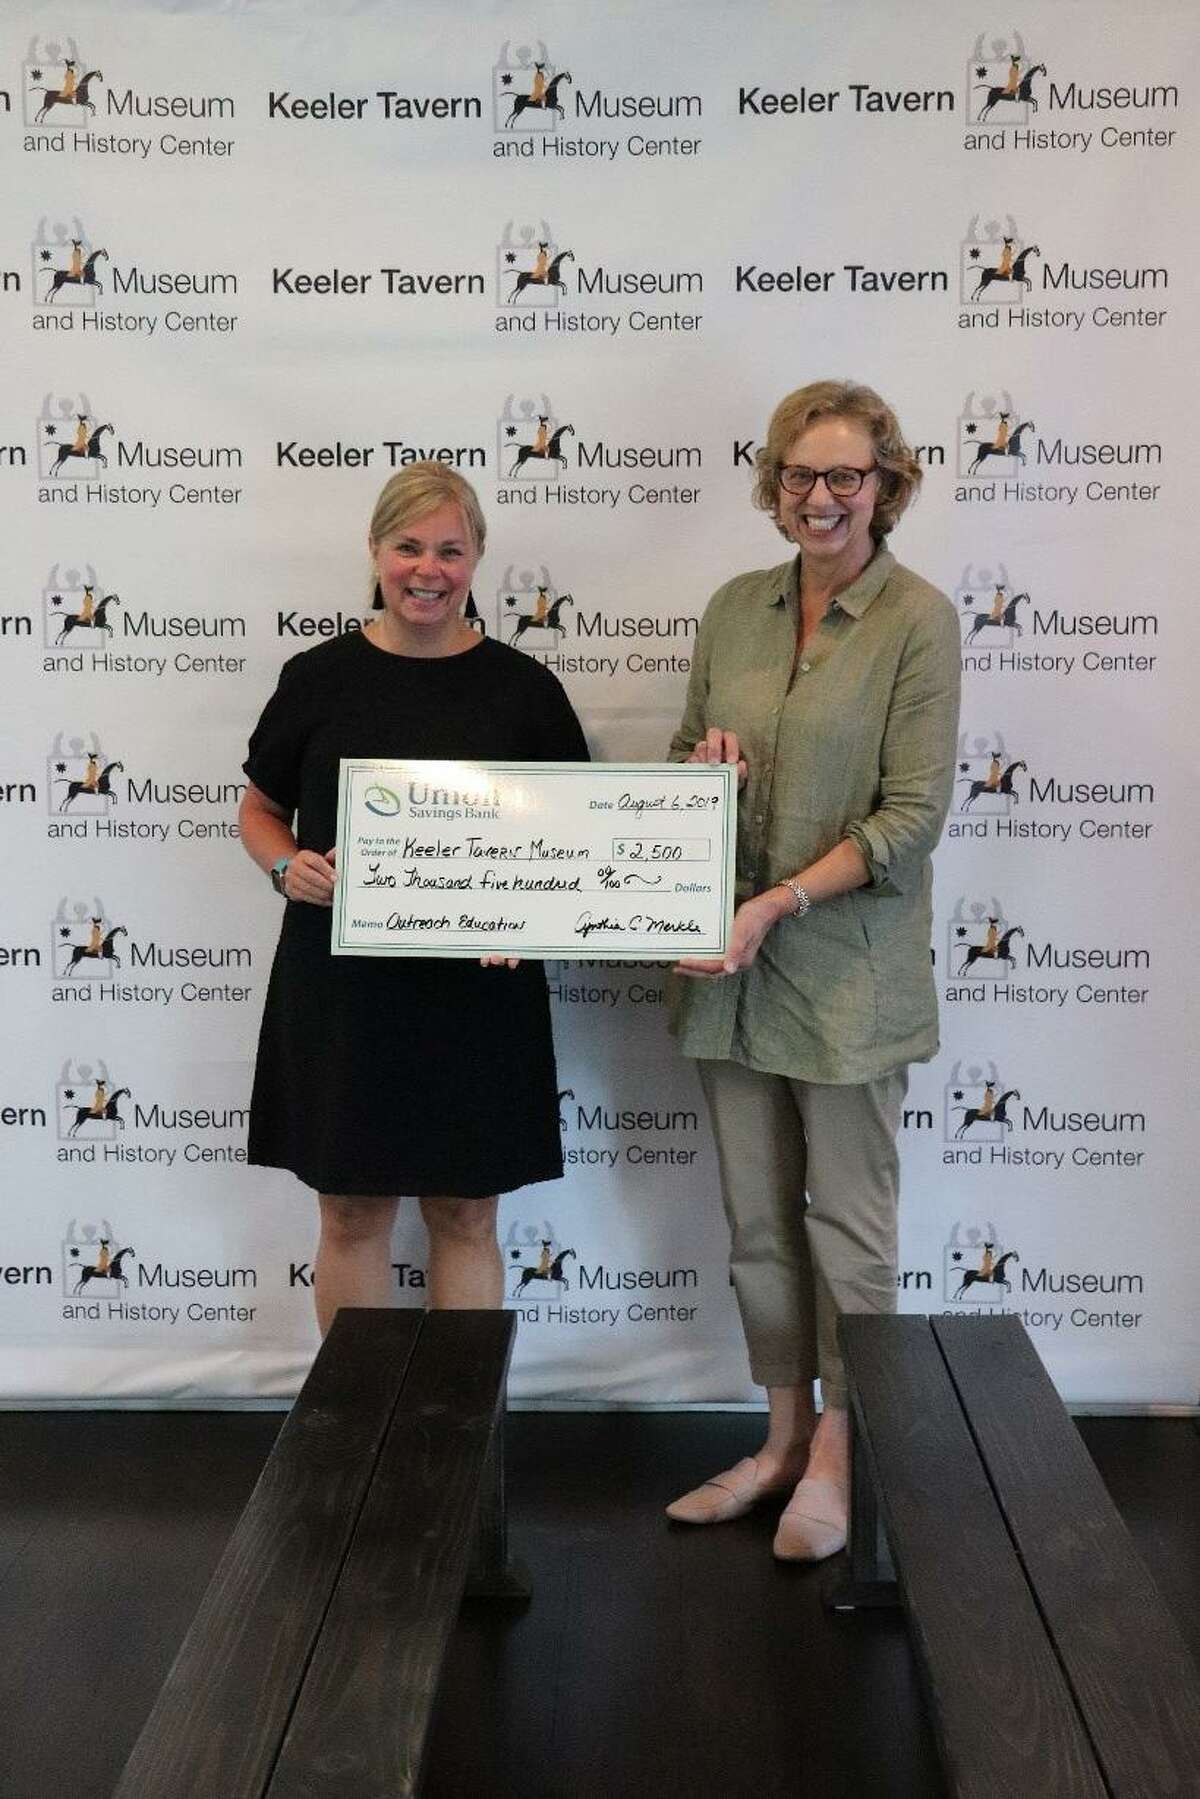 Michele Bonvicini, director of community relations at Union Savings Bank, presents a $2,500 check to Hildegard Grob, executive director at Keeler Tavern Museum & History Center. The funds will be directed toward subsidizing Title 1 school students’ attendance at KTM&HC’s full-day, immersive programs in American history.